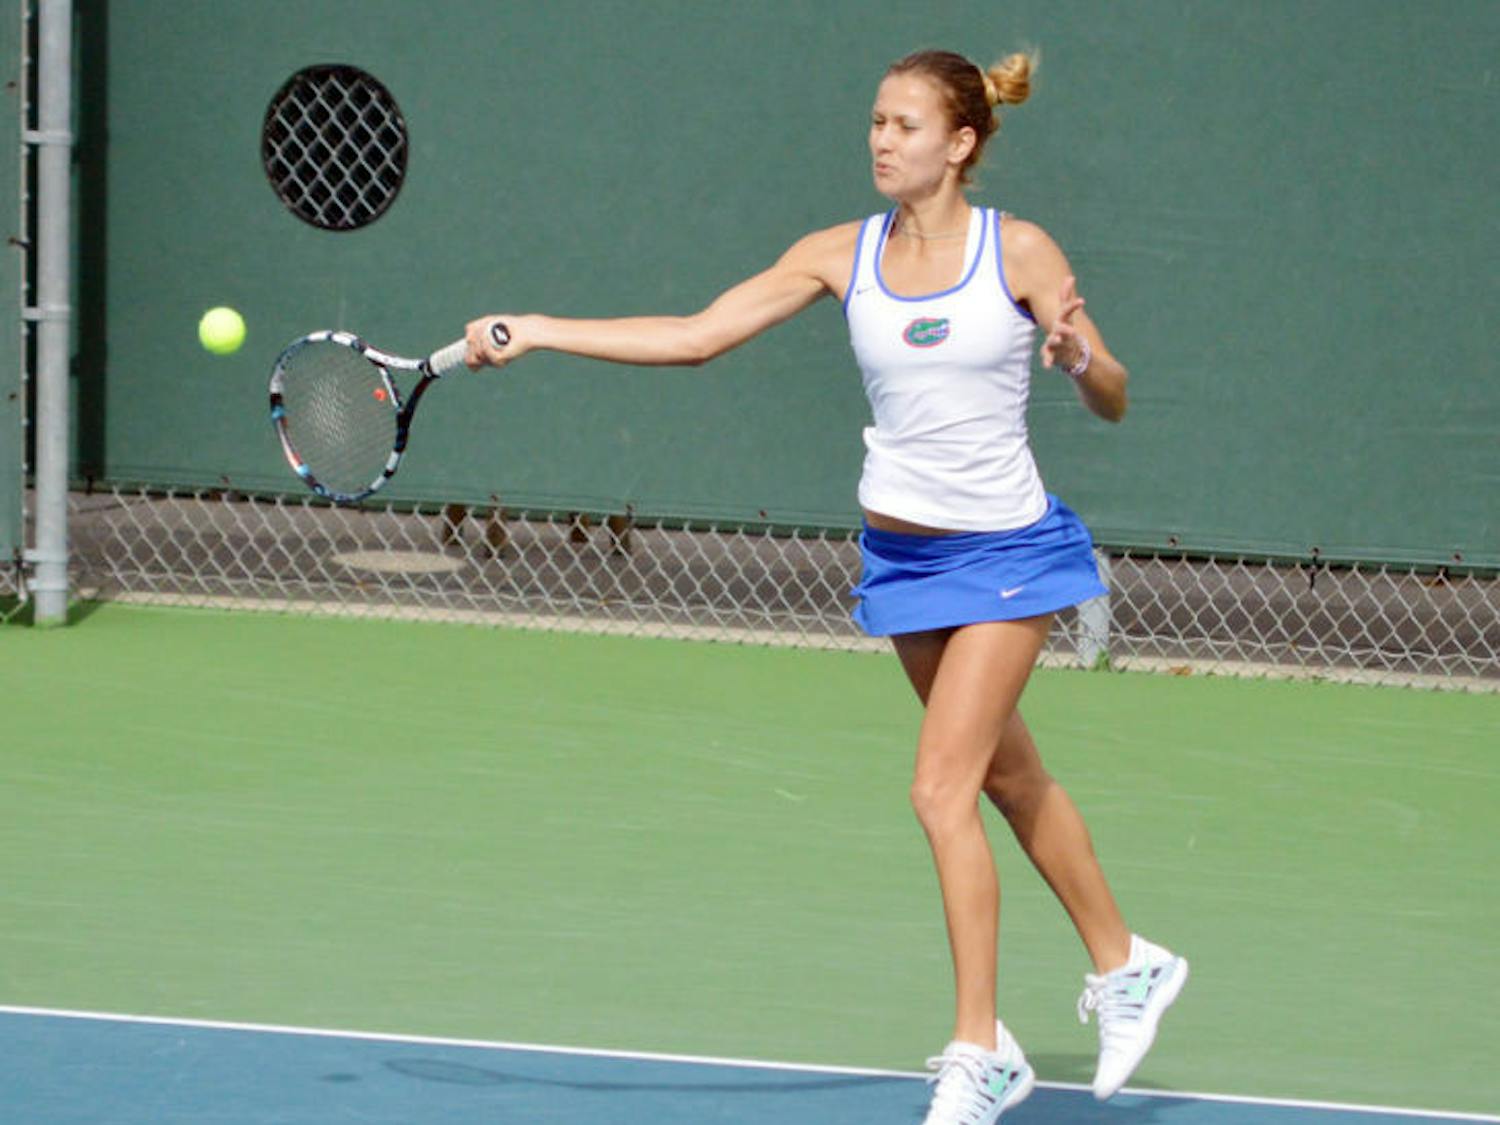 Olivia Janowicz returns the ball during Florida’s 4-0 win against Harvard on Jan. 26 at the Ring Tennis Complex.